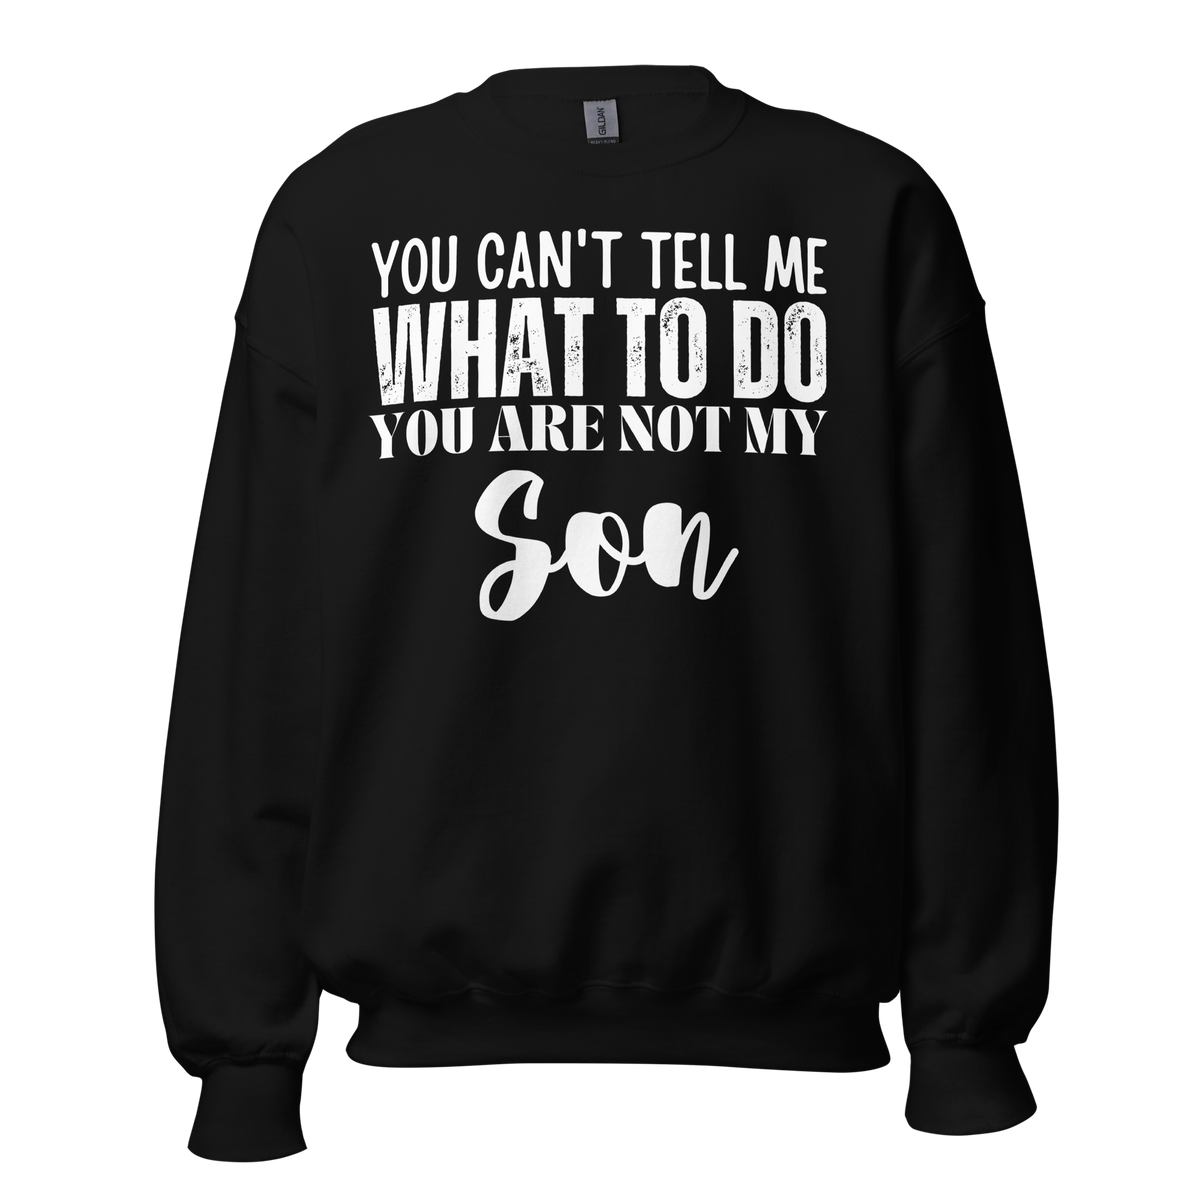 Dad sweatshirt, fathers day shirt, funny mens shirt, sweatshirt, gift for him, gift for her, funny mom tee, funny dad tee, new papa shirt, father sweatshirt, you can't tell me what to do you are not my son, new dad shirt